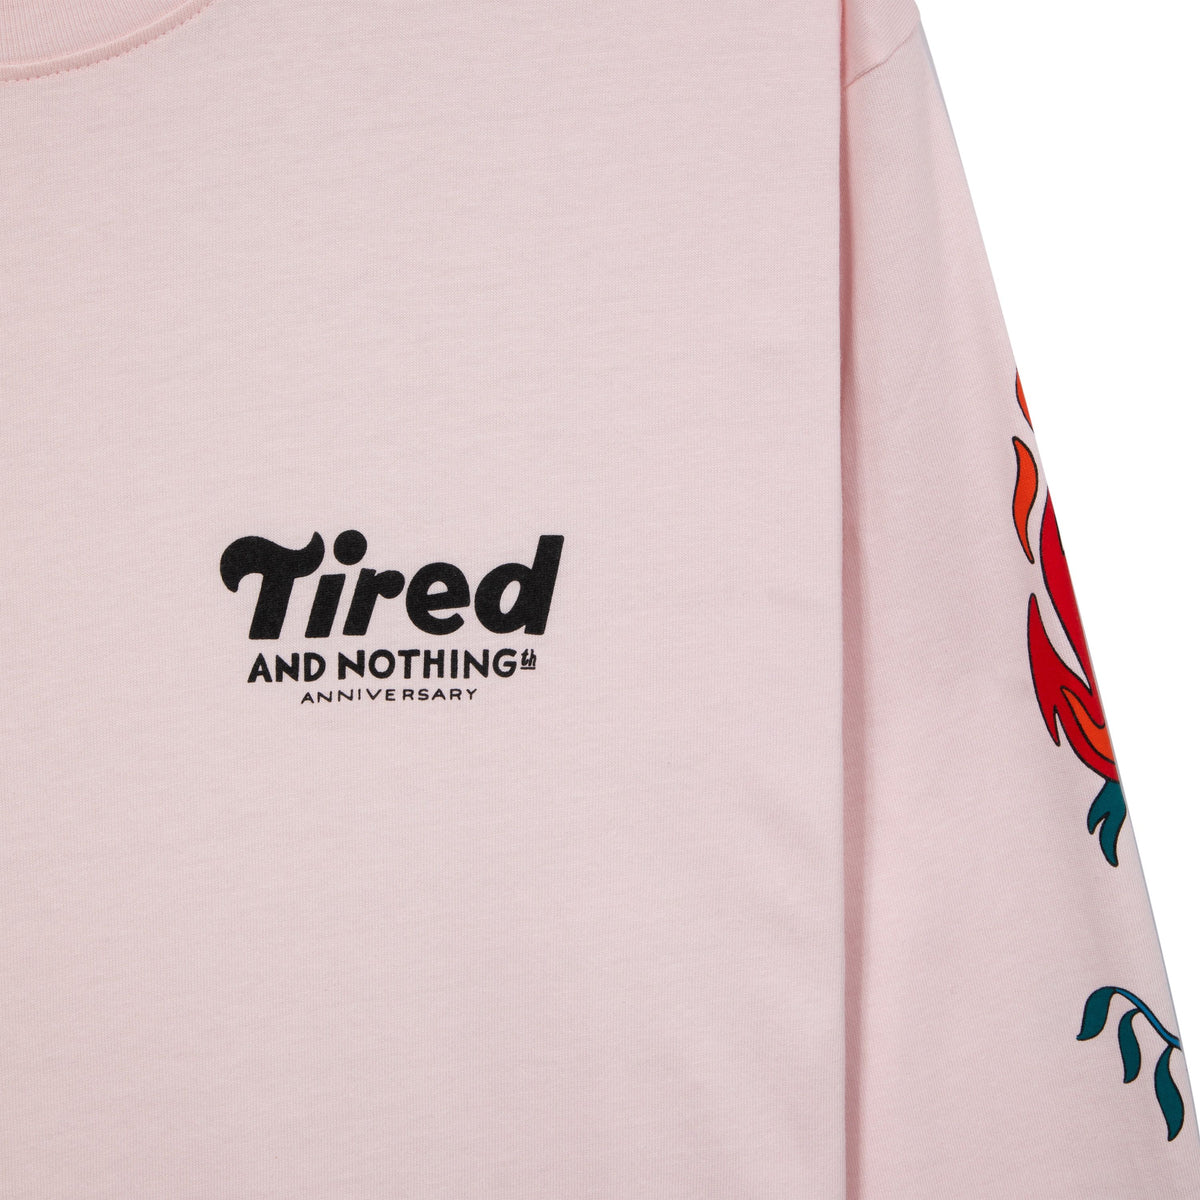 Tired Nothingth Long Sleeve T-Shirt Pink - Venue Skateboards